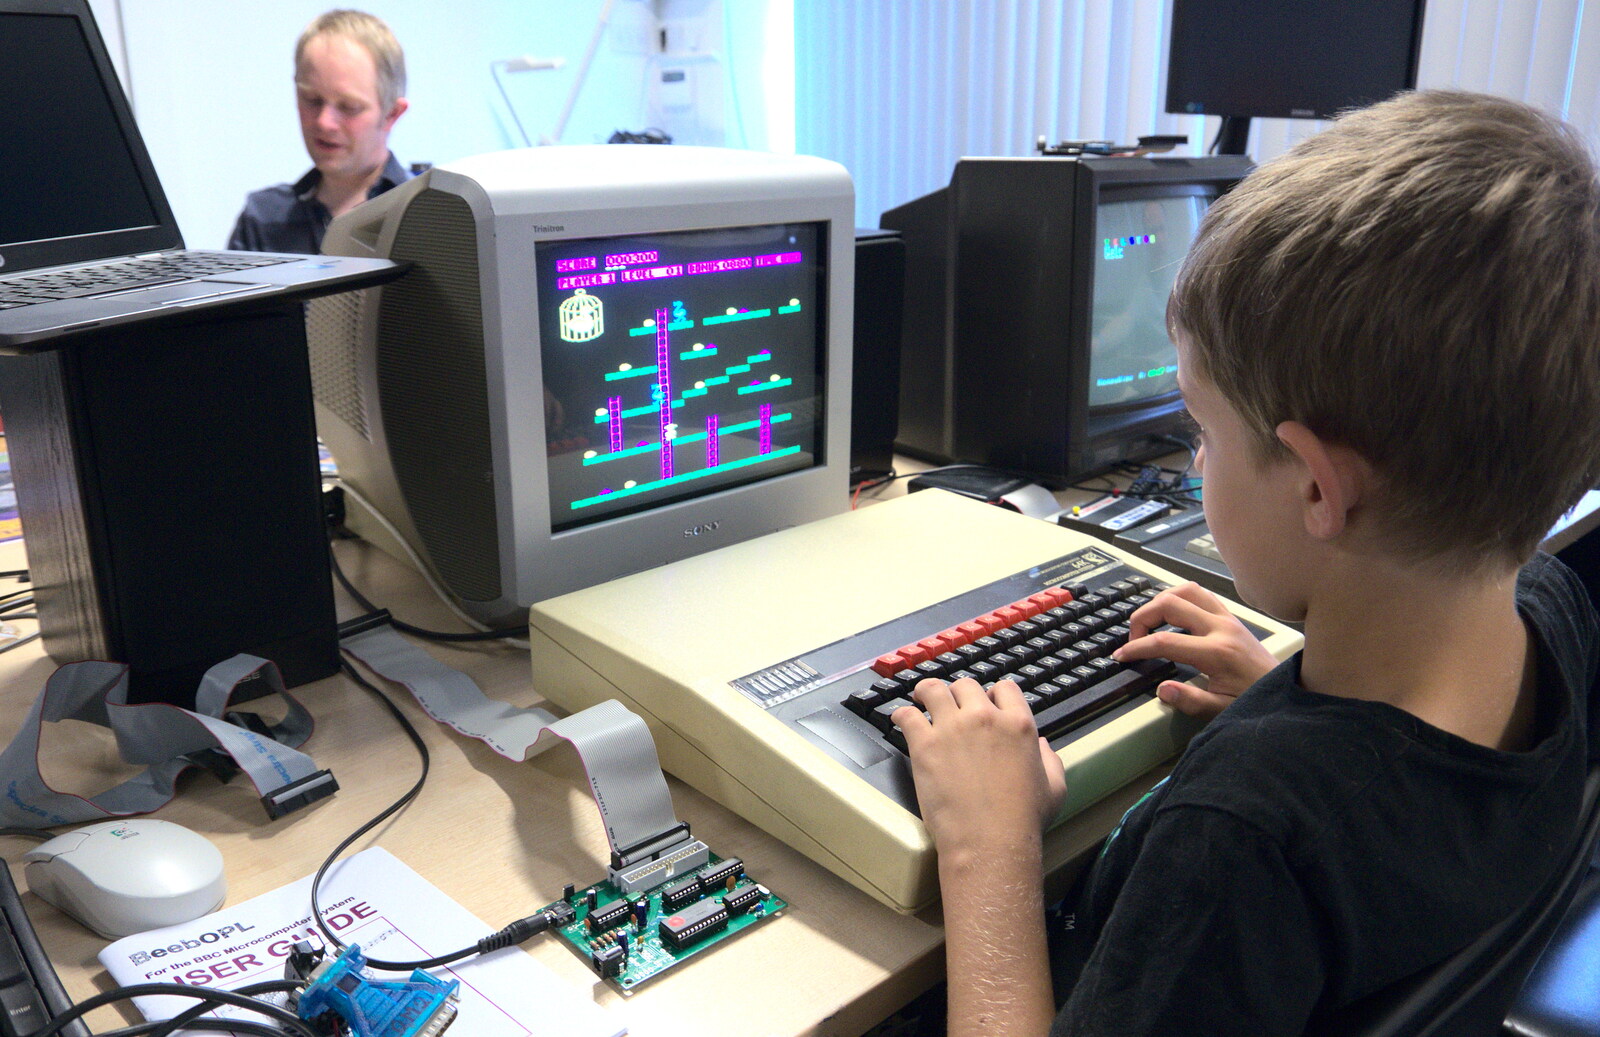 Fred plays Chuckie Egg on a BBC Micro from The Retro Computer Festival, Centre For Computing History, Cambridge - 15th September 2018